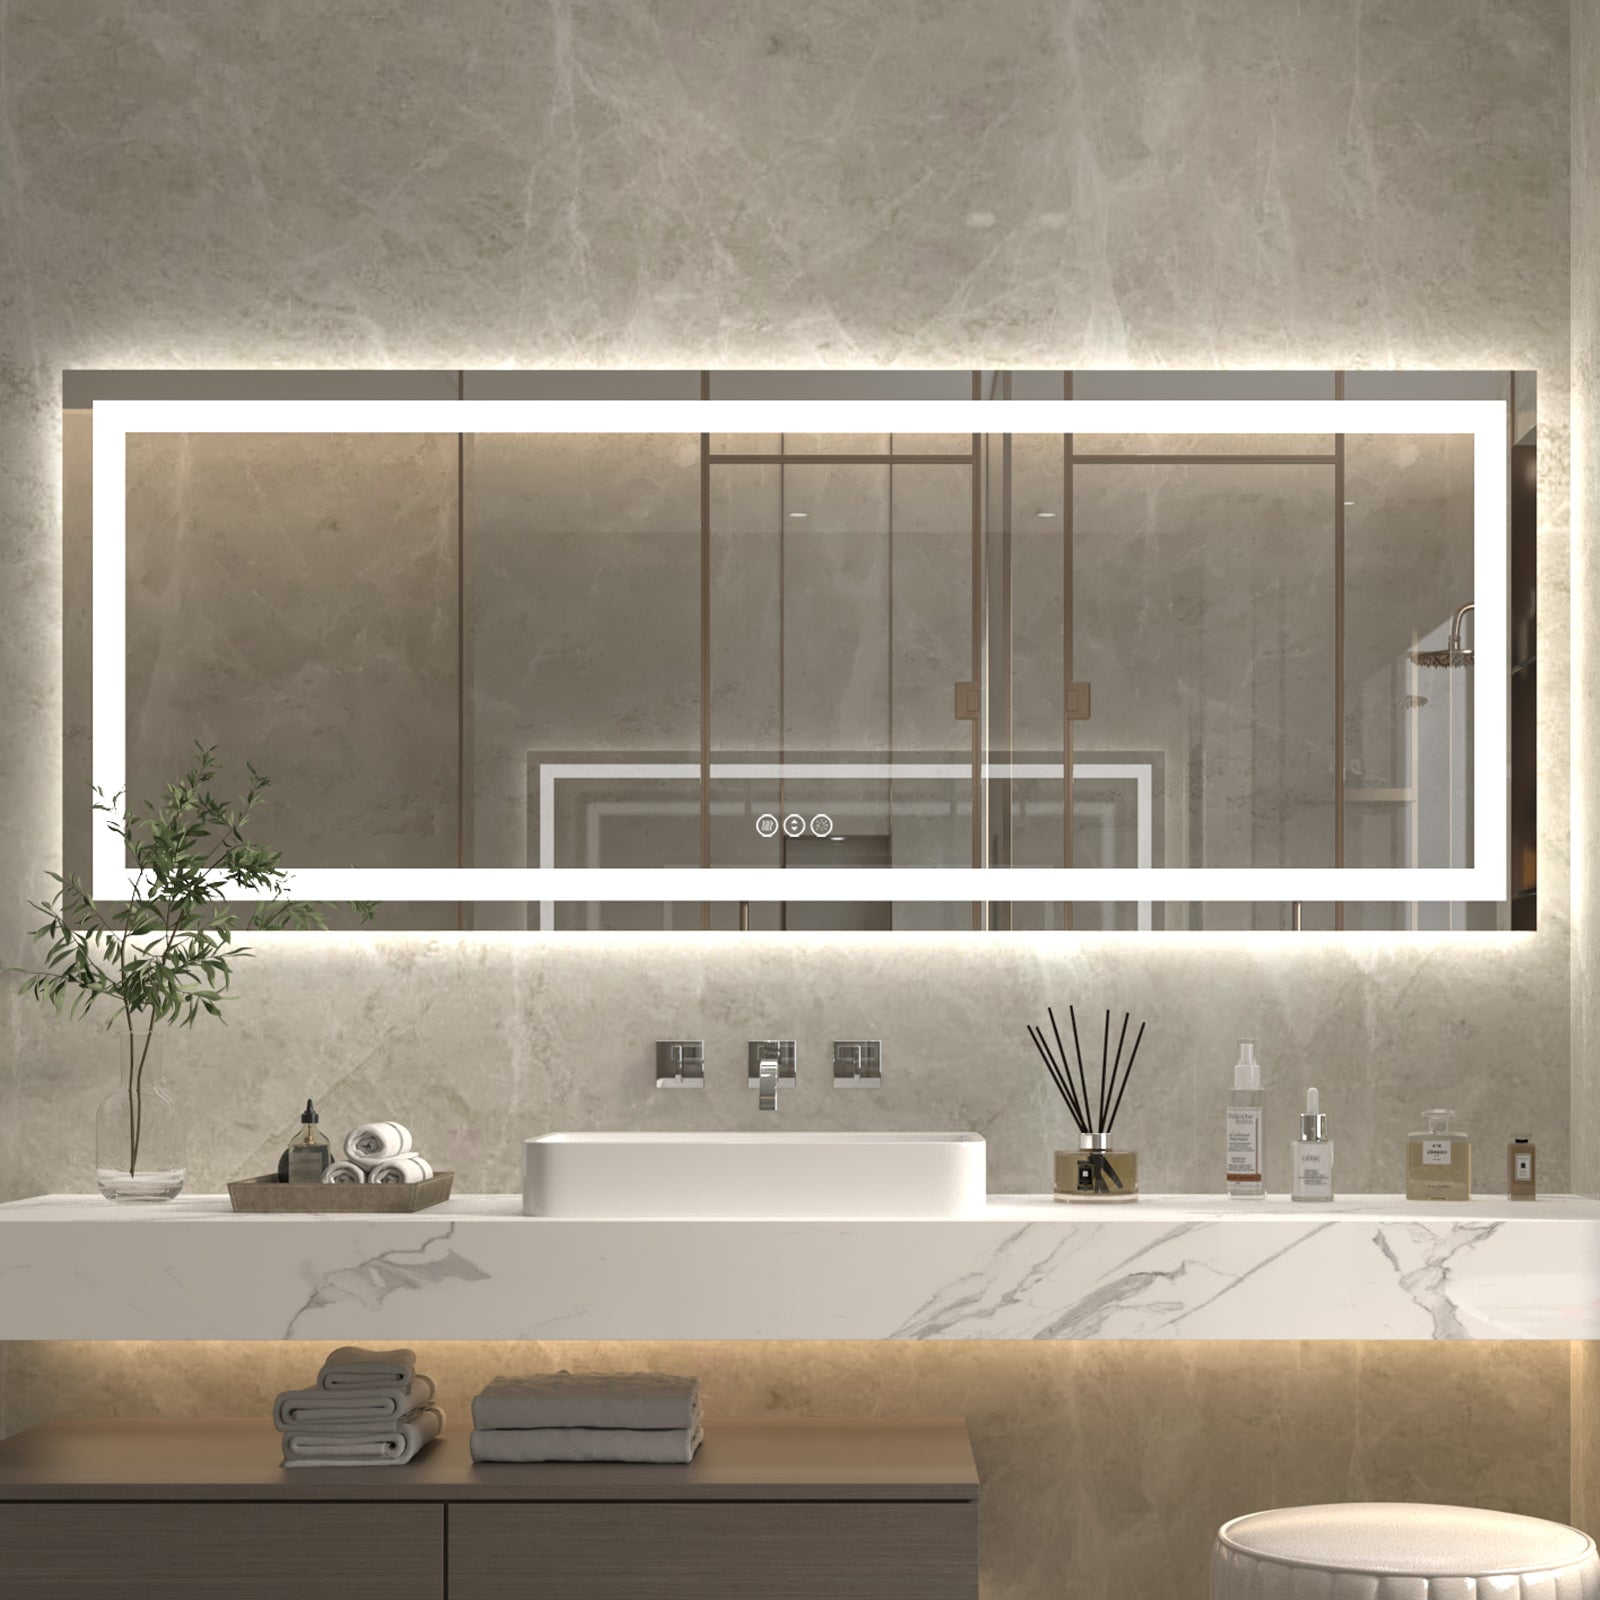 ExBrite 84 x 32 inch LED Bathroom Large Light Led Mirror,Anti Fog,Dimmable,Dual  Lighting Mode,Tempered Glass 